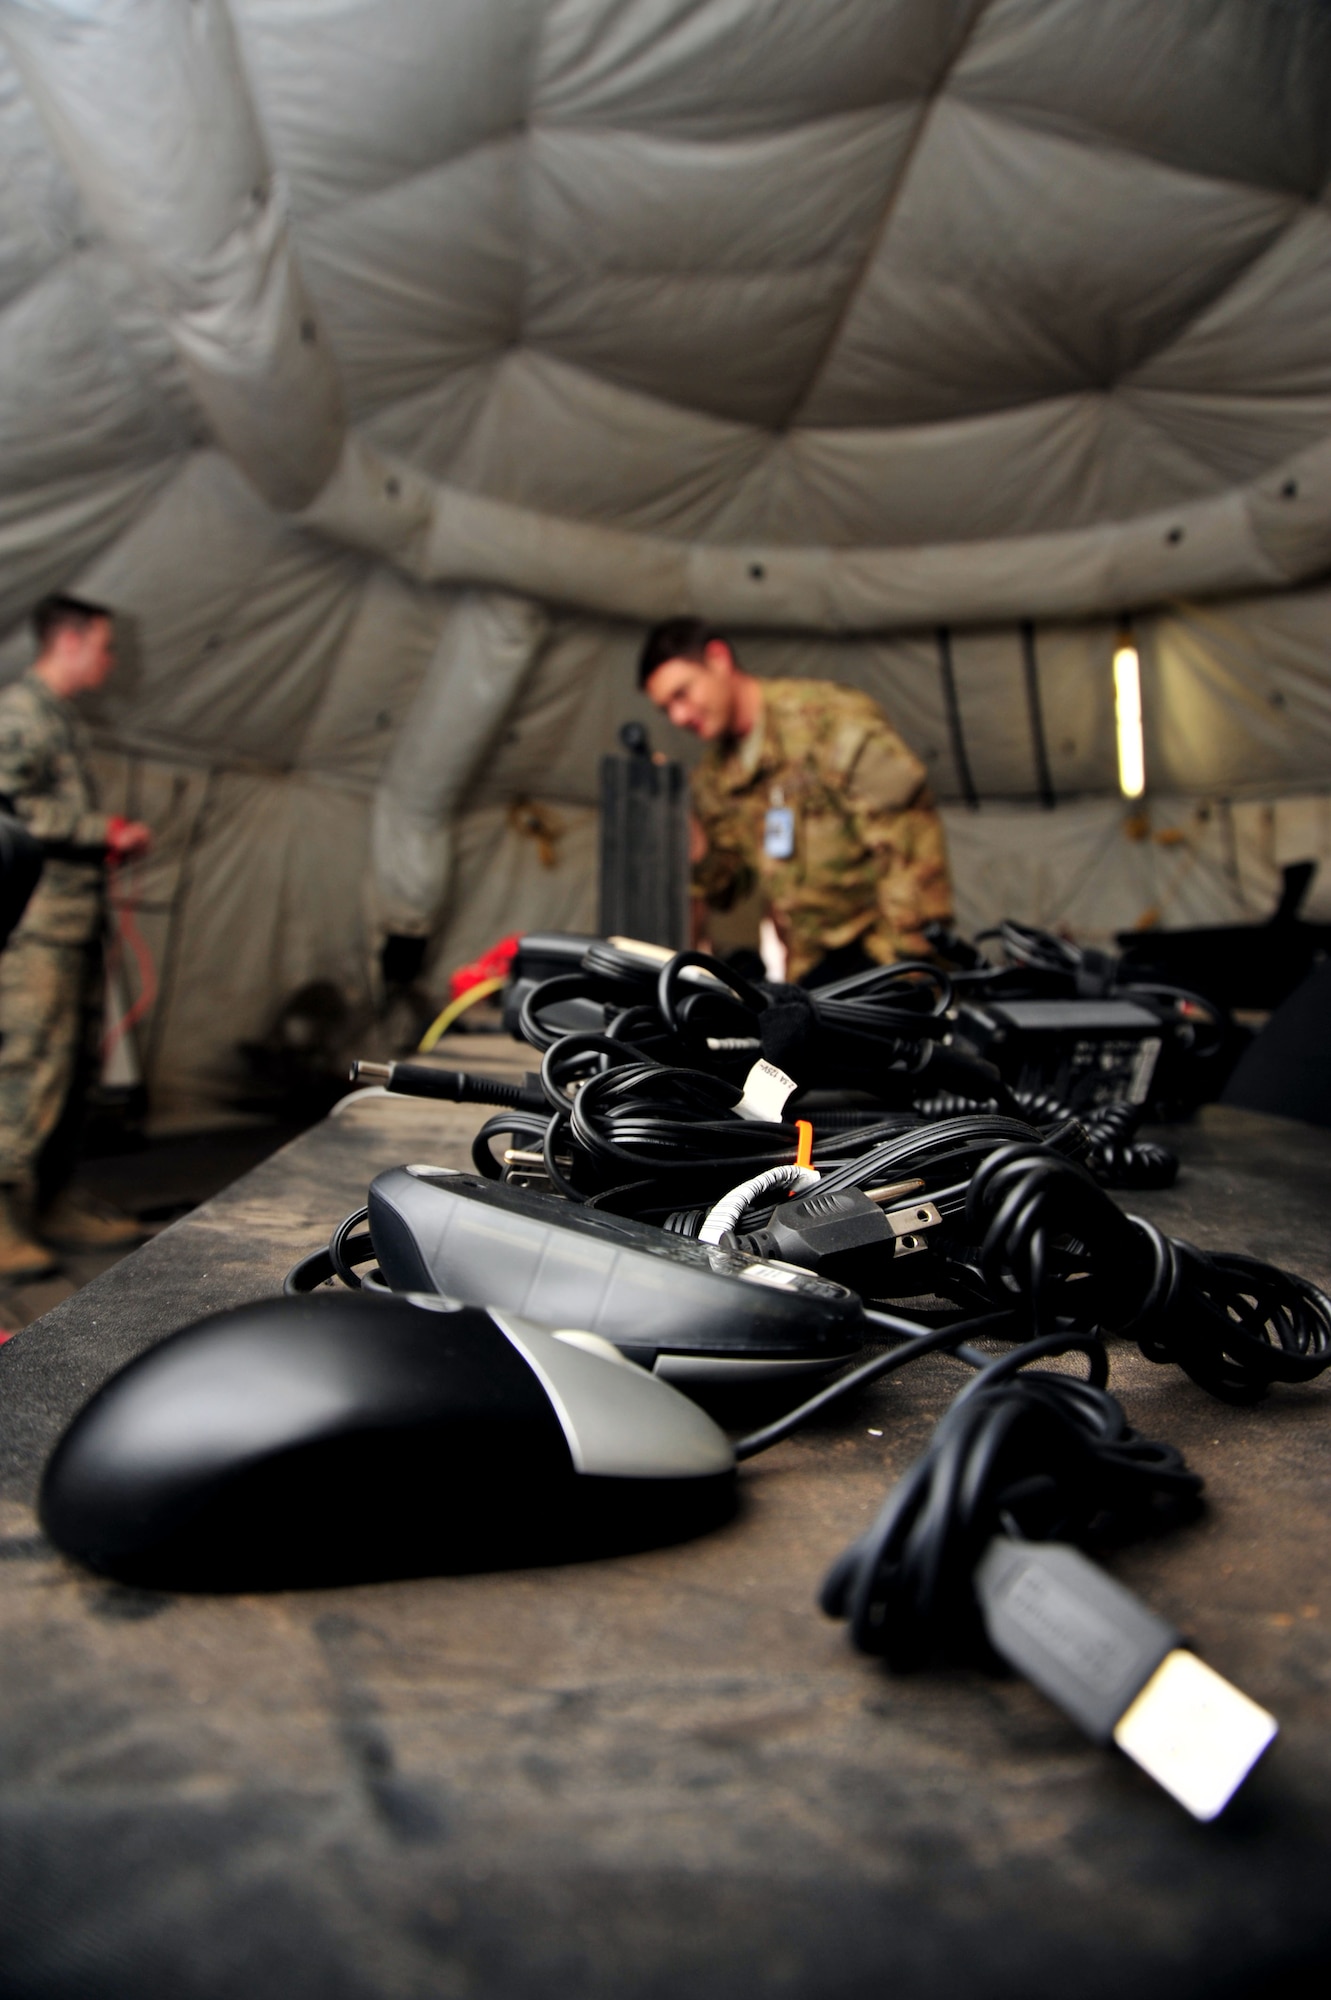 U.S. Air Force Airmen tear down communication systems after the Angel Thunder exercise at Davis-Monthan Air Force Base, Ariz., April 22, 2013. Angel Thunder is the world’s largest most realistic, joint service, multinational, interagency combat search and rescue exercise.(U.S. Air Force photo by Airman 1st Class Josh Slavin/Released)